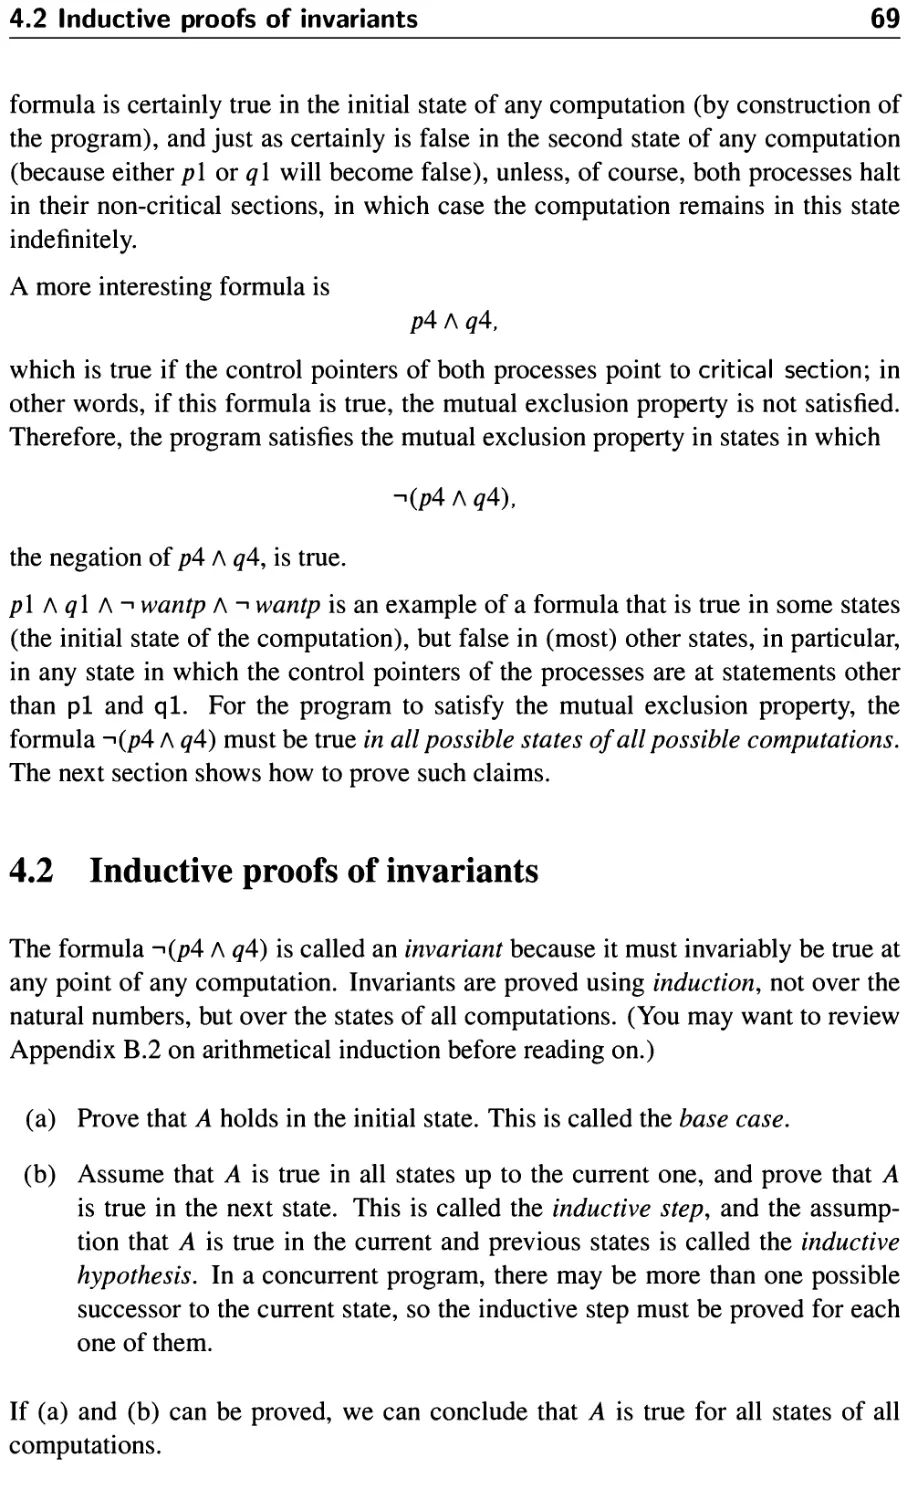 4.2 Inductive proofs of invariants